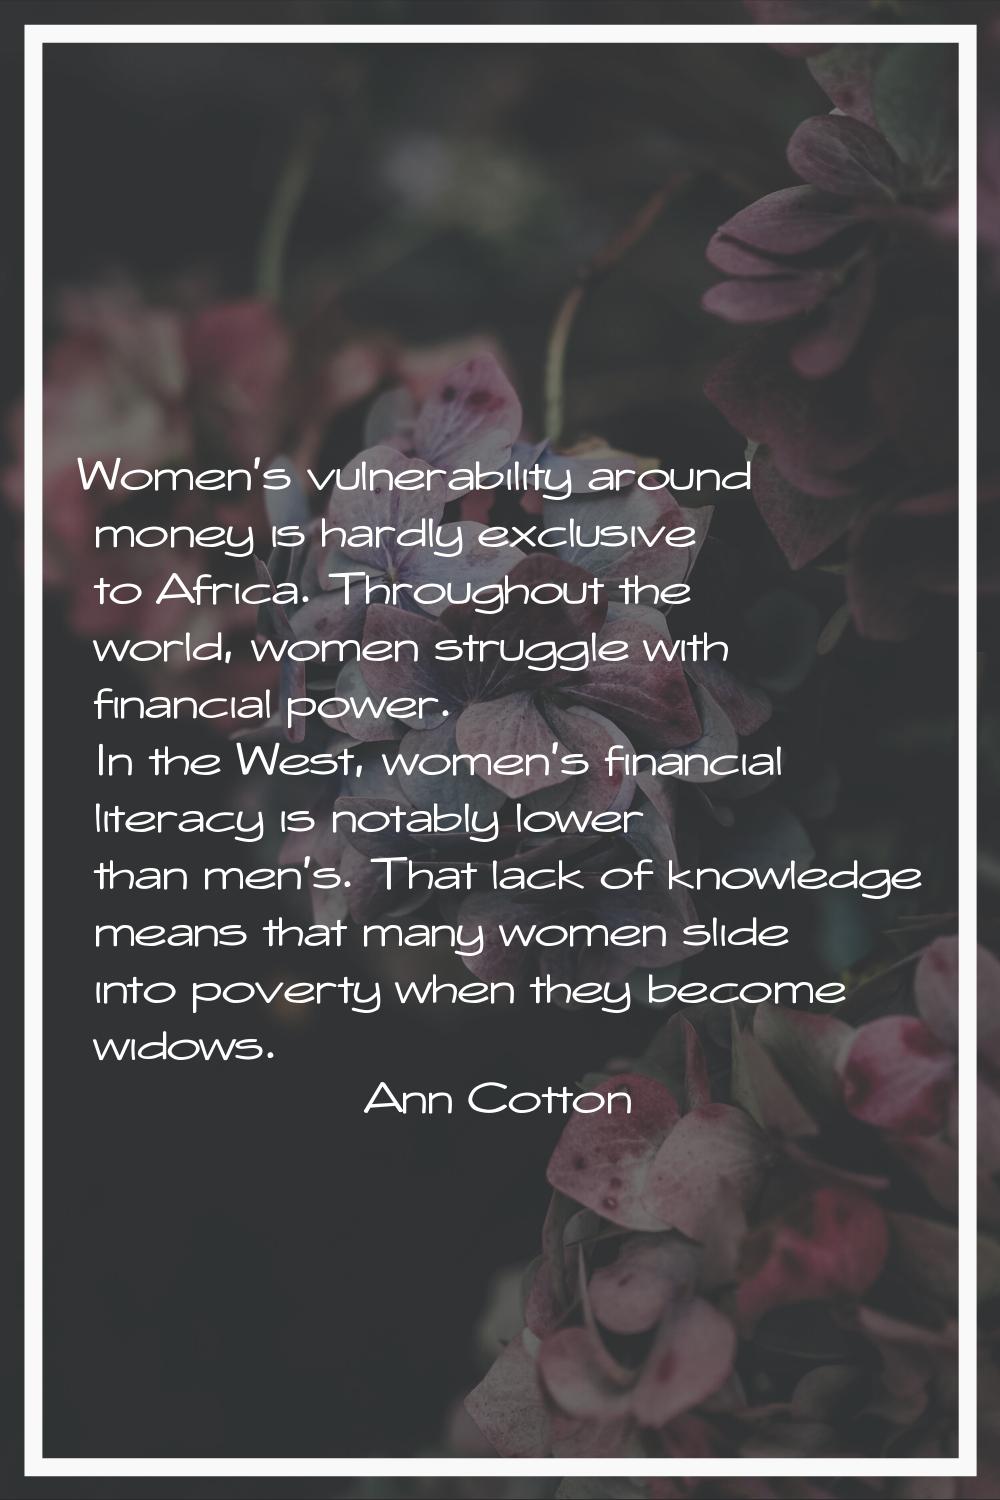 Women's vulnerability around money is hardly exclusive to Africa. Throughout the world, women strug